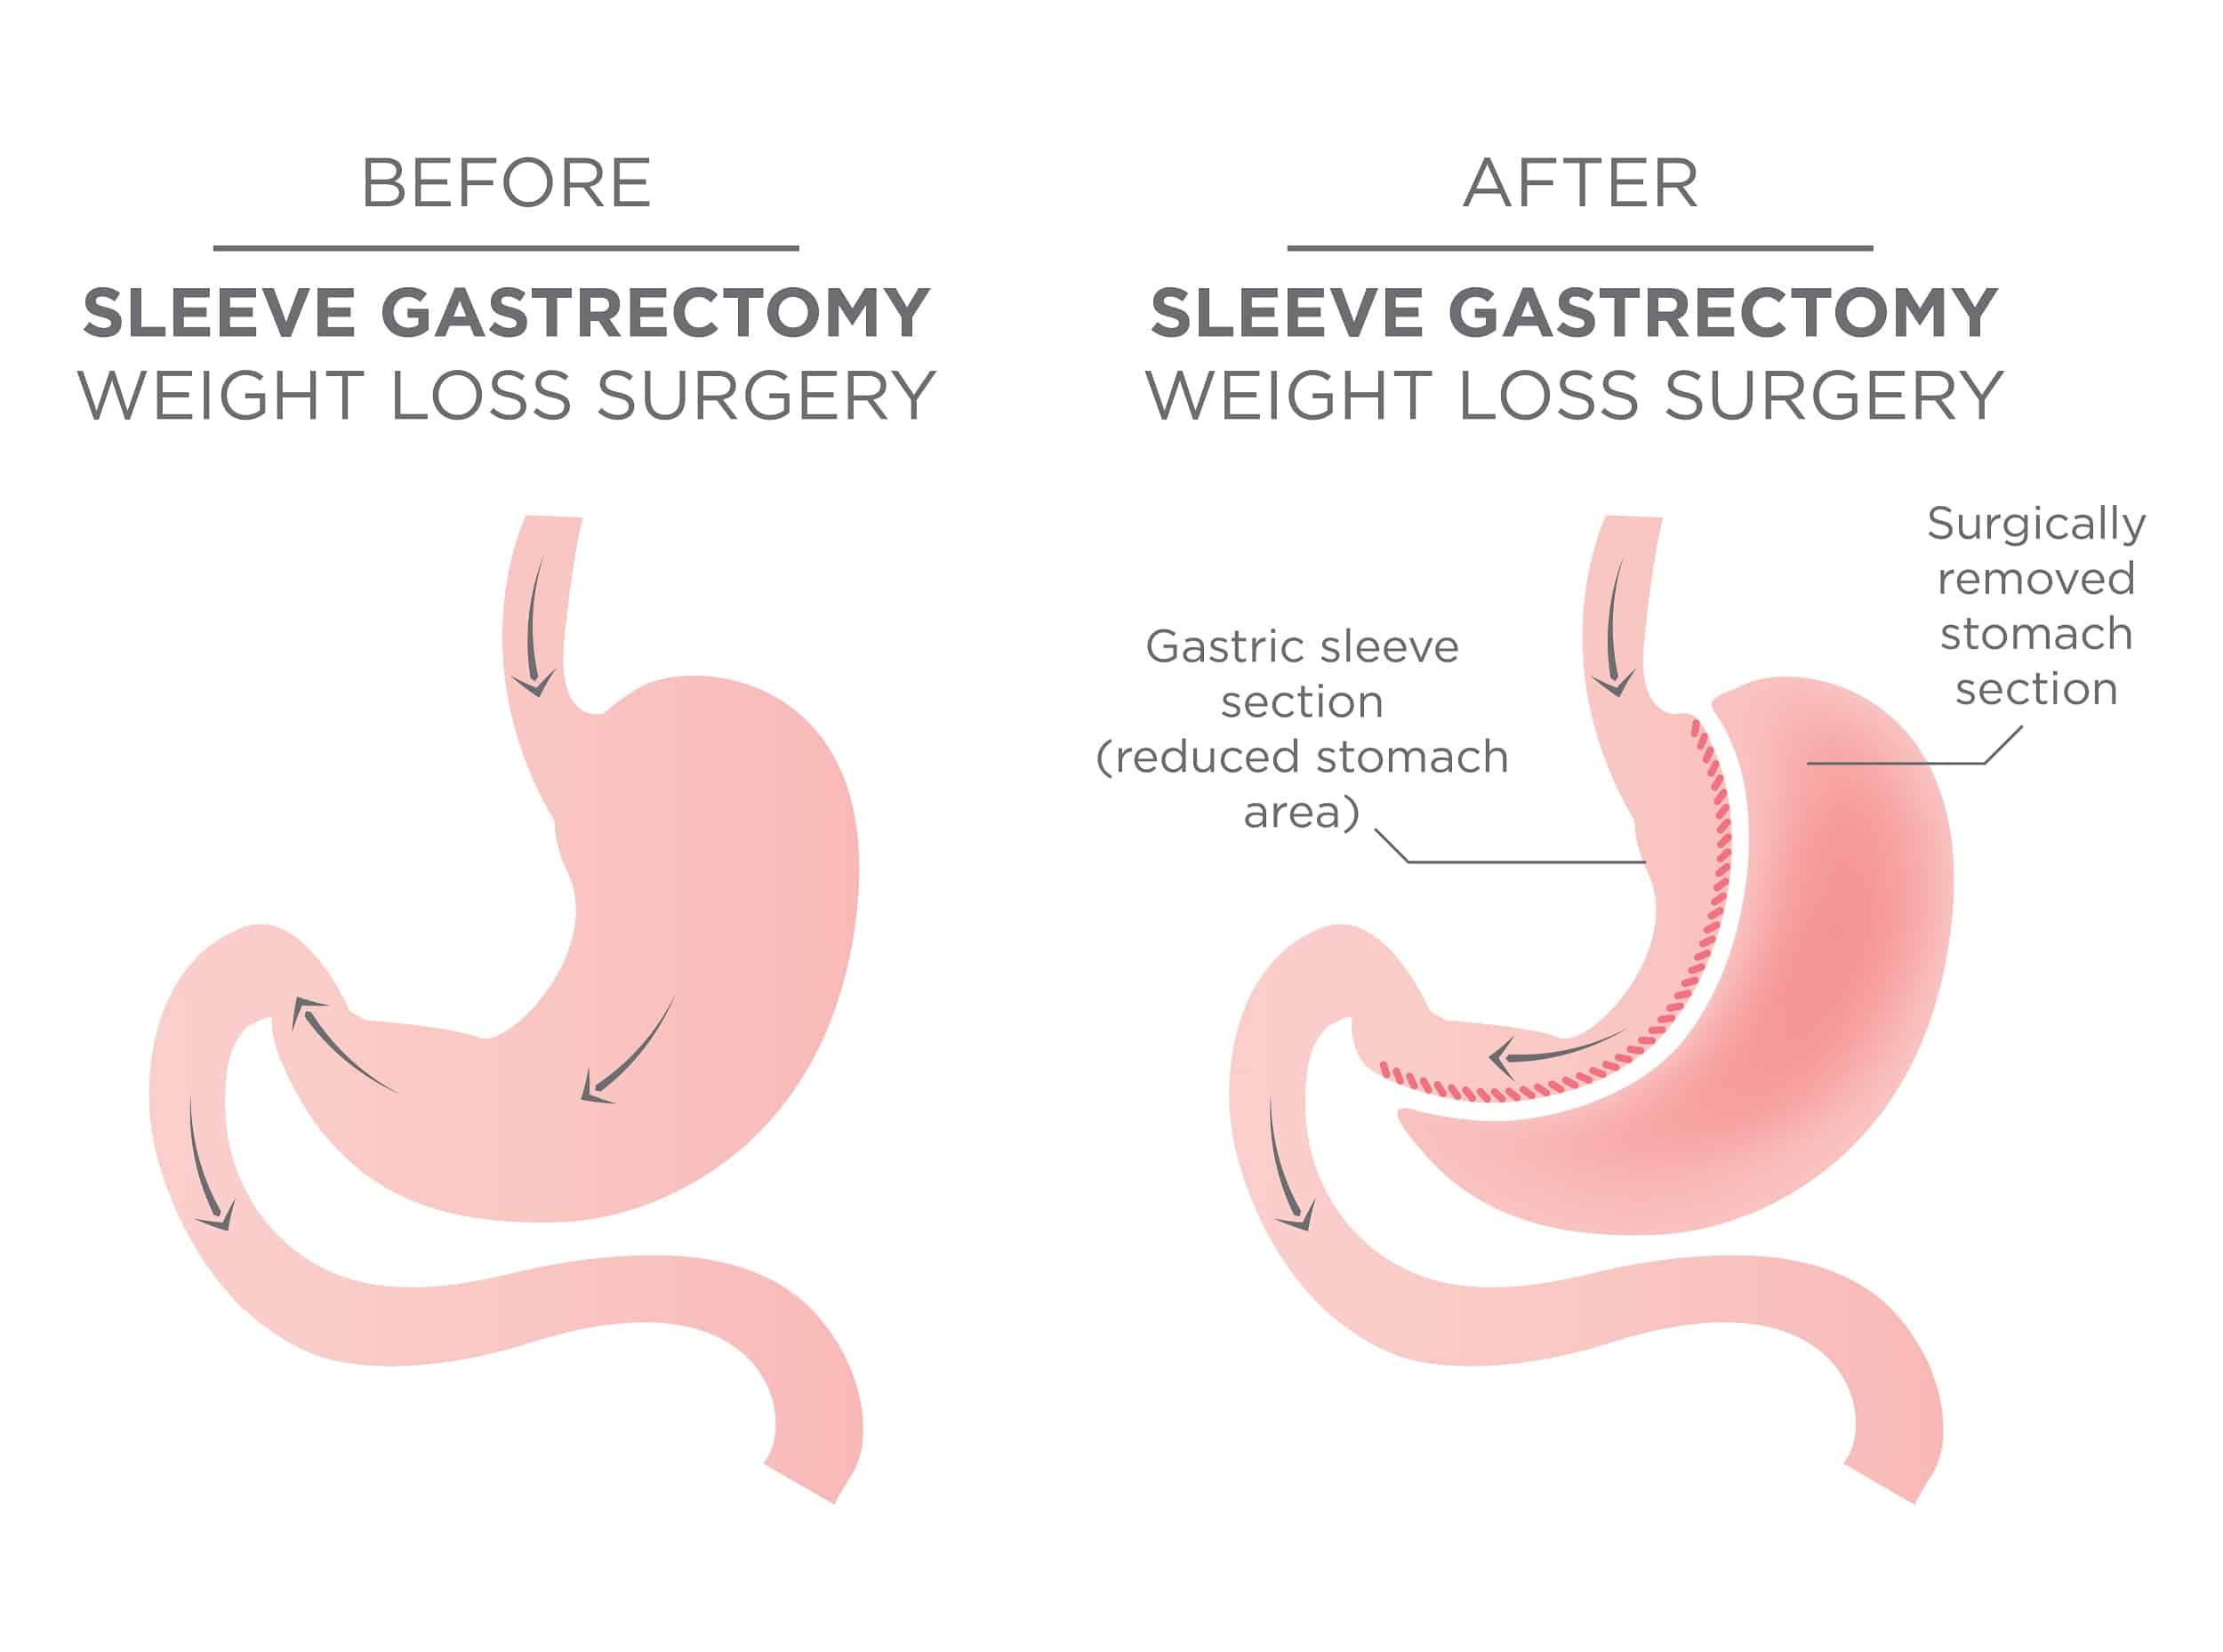 Is Gastric Sleeve Surgery The Right Choice For Me?